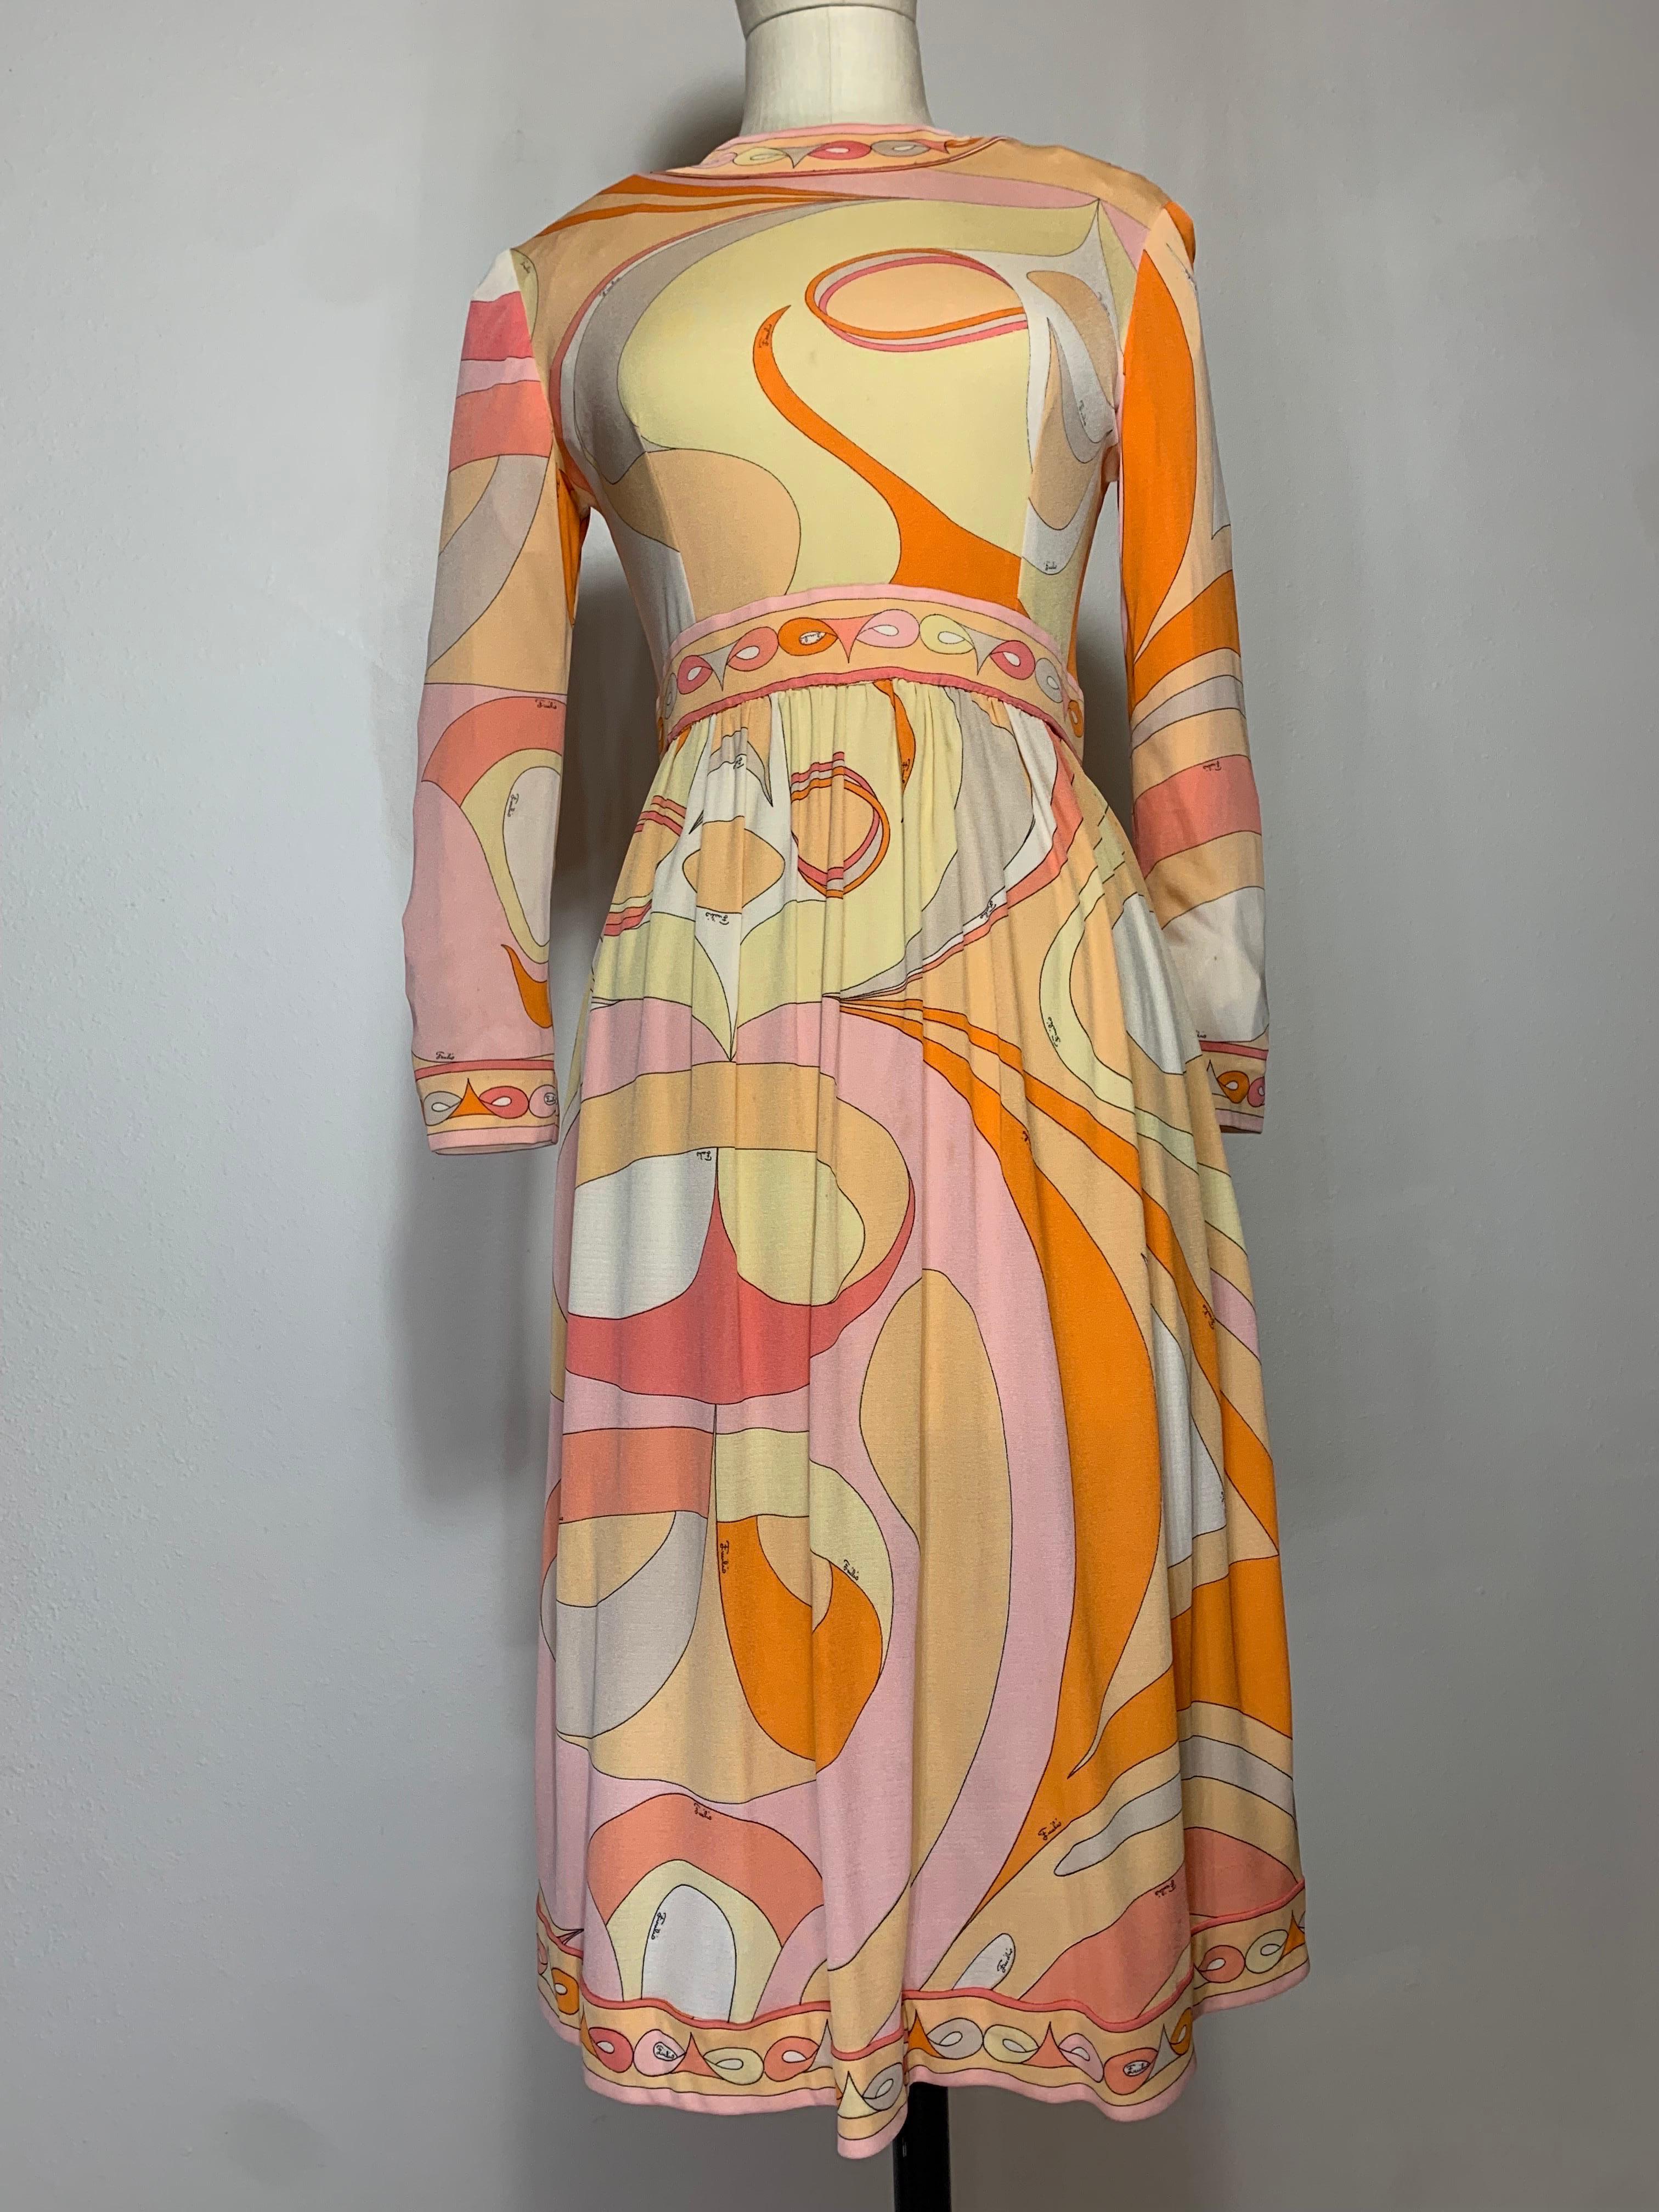 Women's 1960s Emilio Pucci Psychedelic Print Mod Day Dress w Full Skirt in Tangerine  For Sale